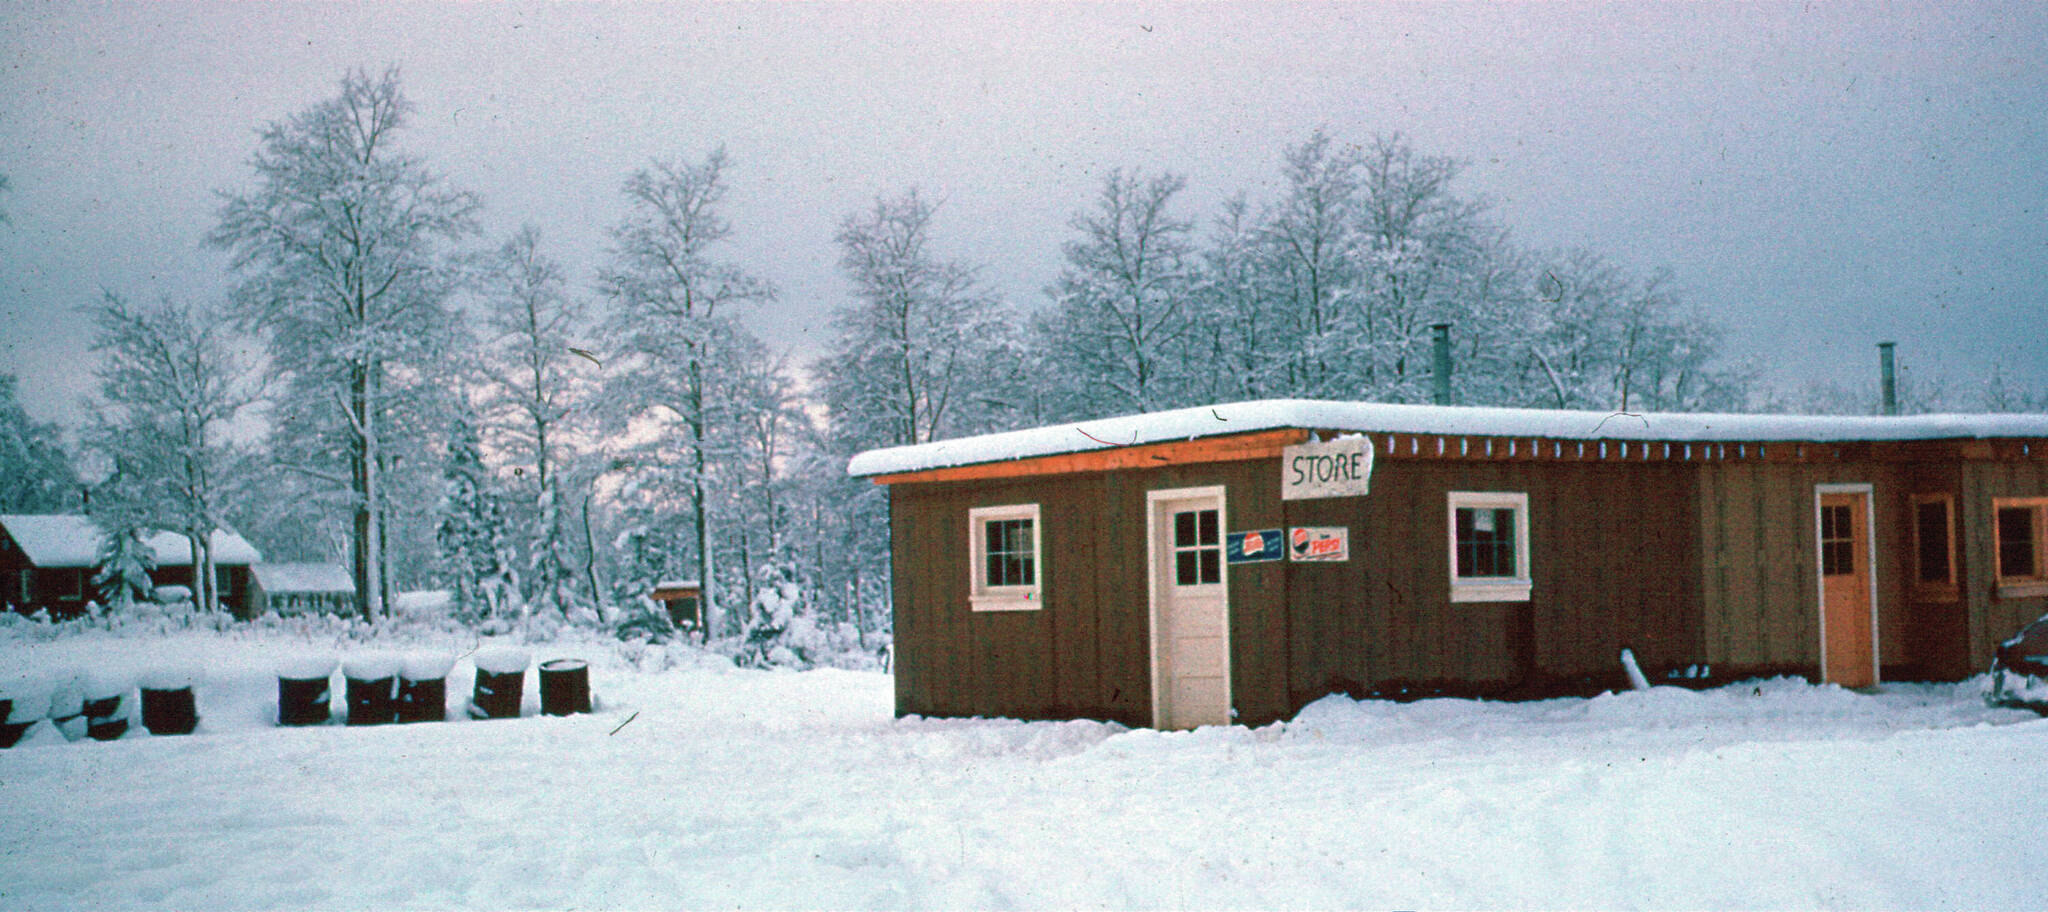 Ray Sandstrom photo courtesy of the KPC historical photo archive
Soldotna’s first-ever grocery store was built and opened in 1952.